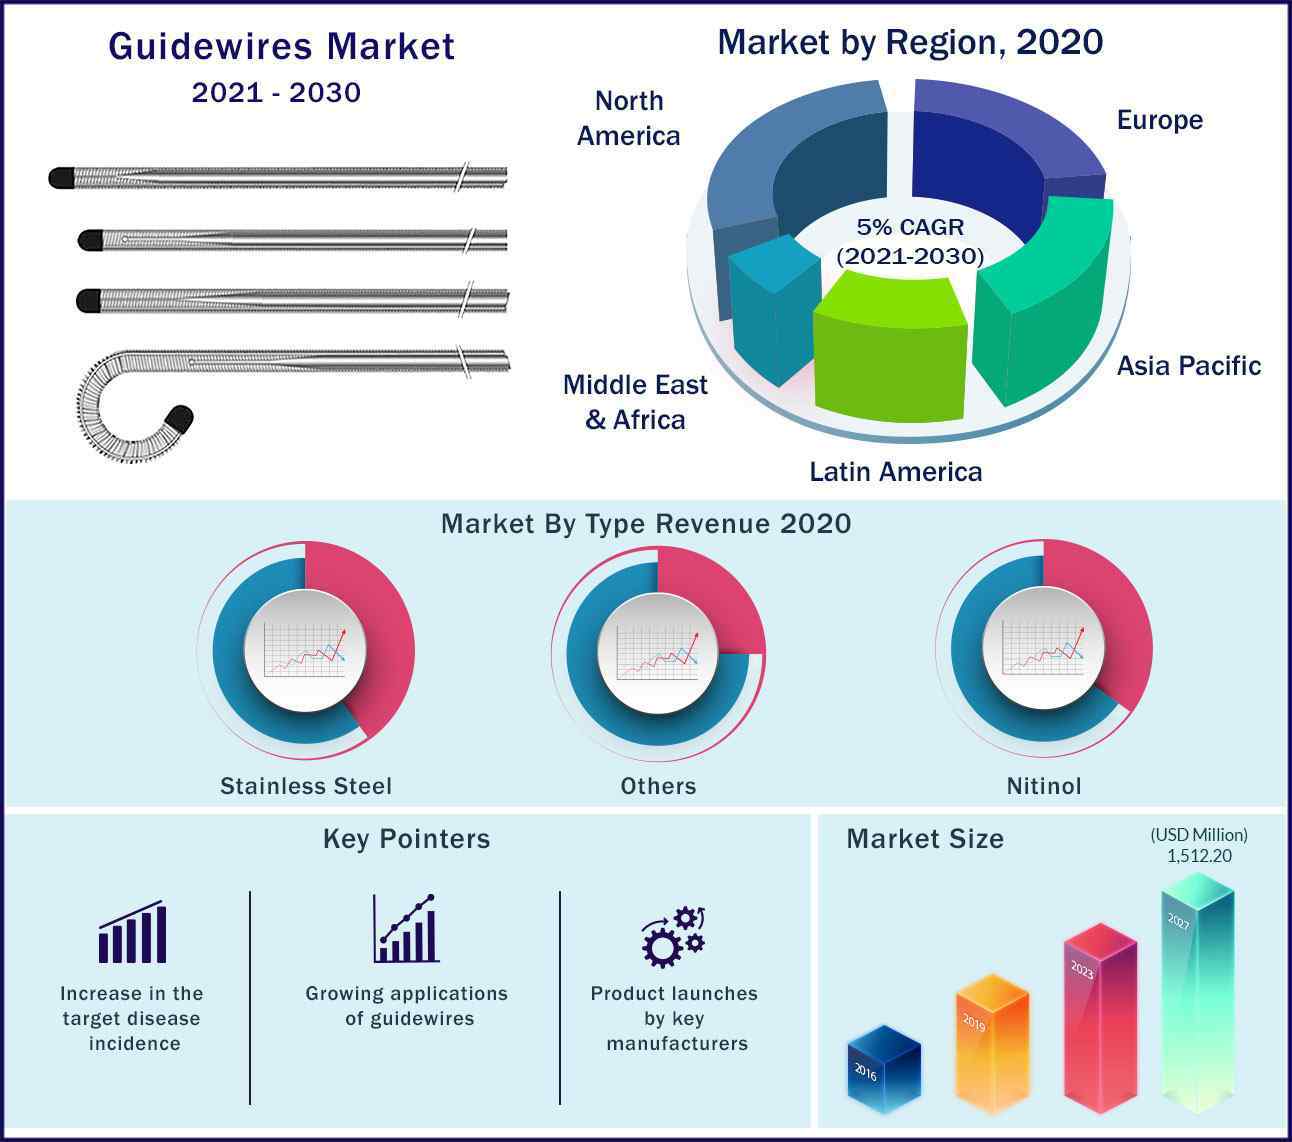 Global Guidewires Market 2021 to 2030